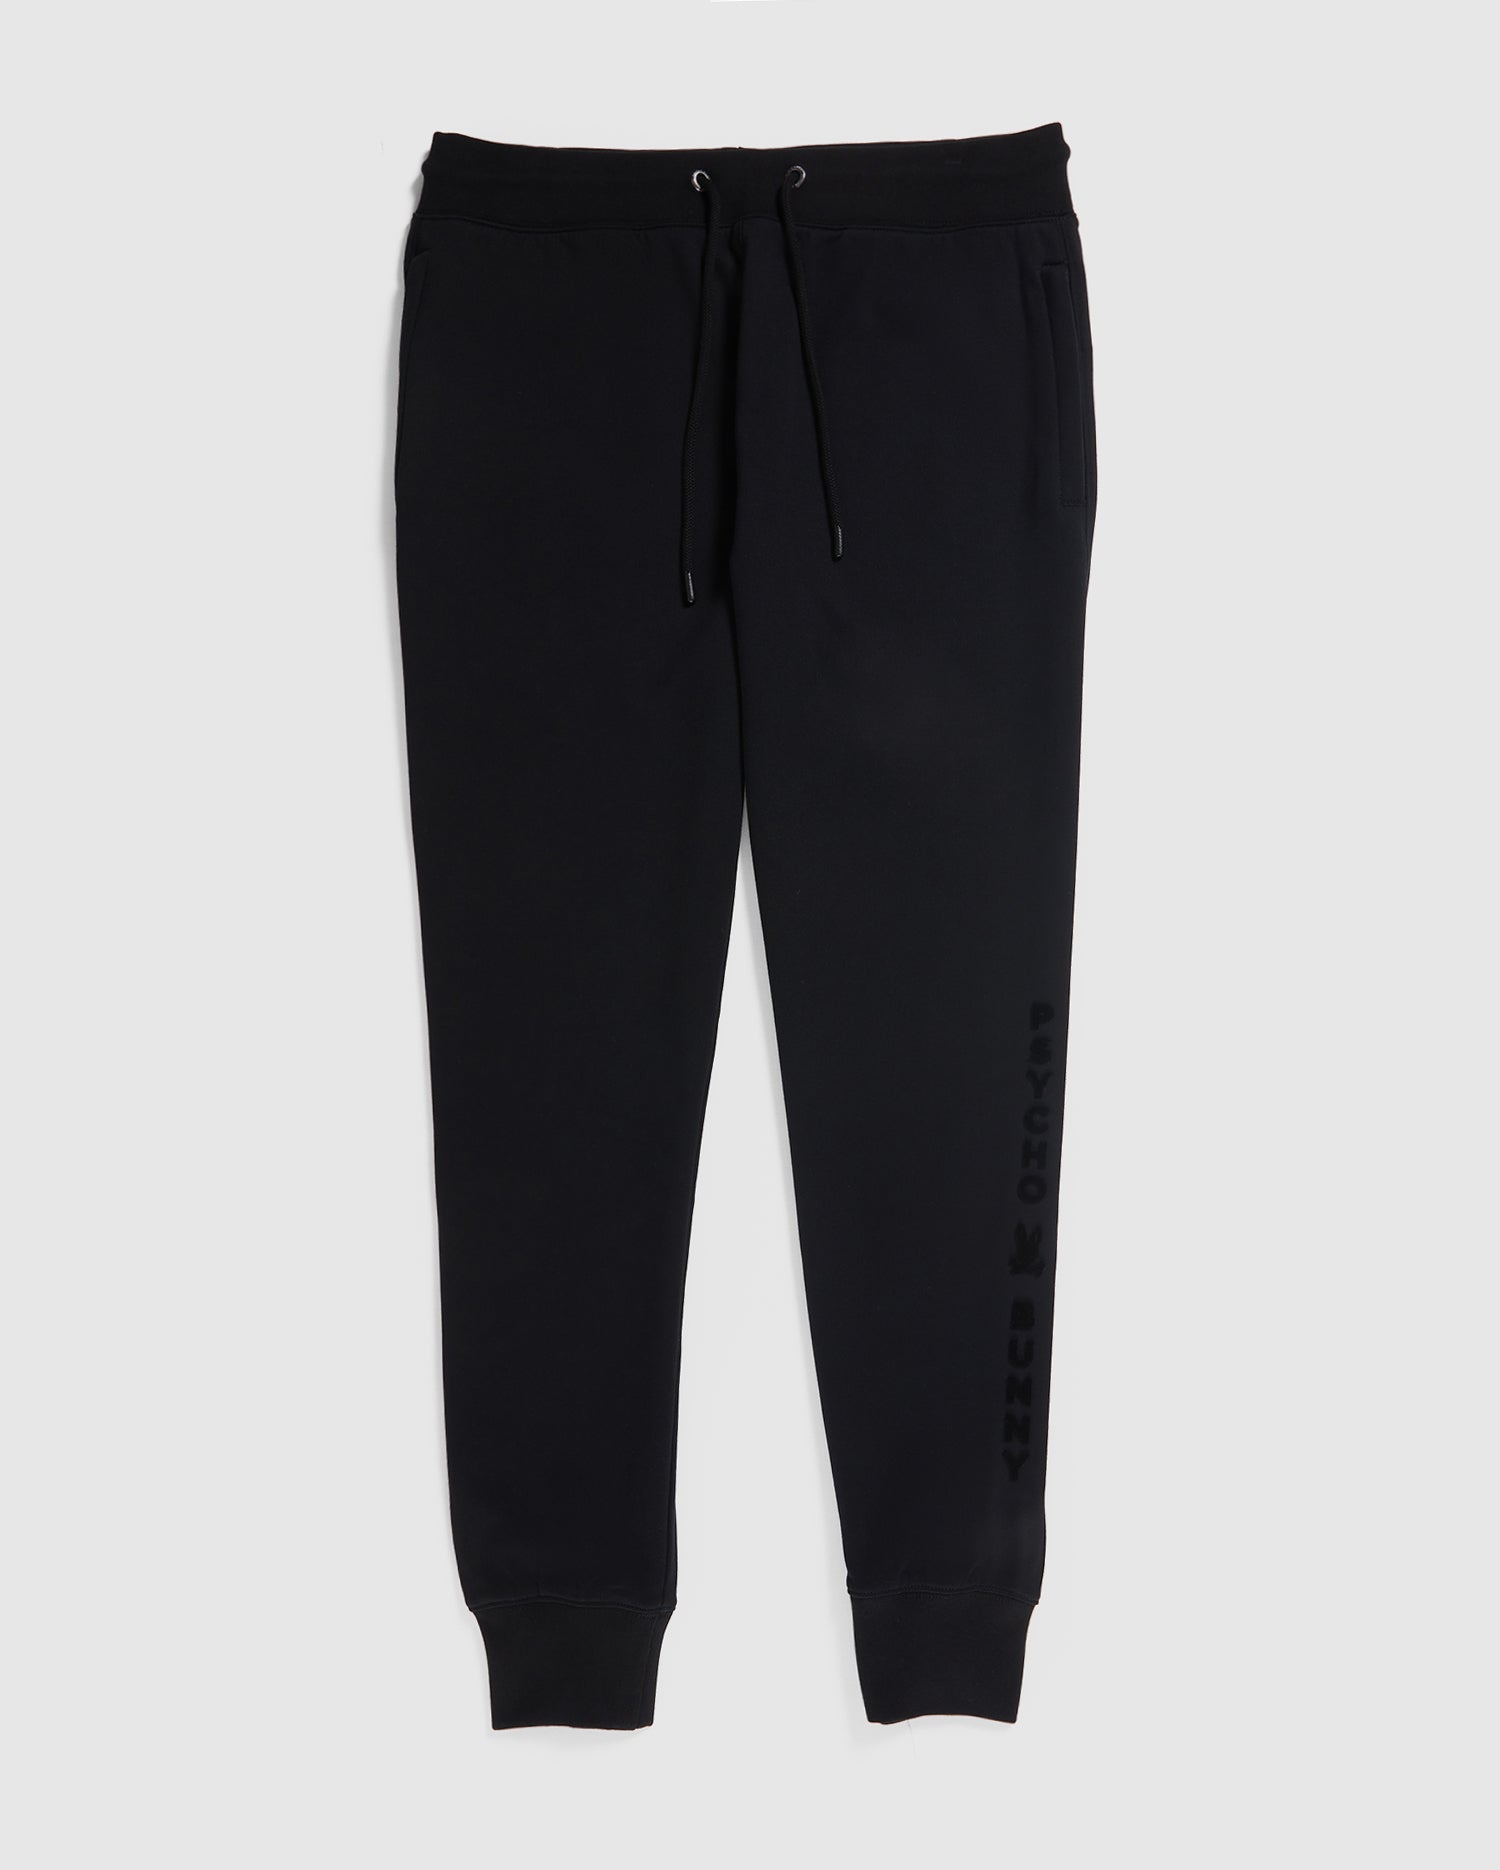 MENS ROYCE BLACK SWEATPANTS WITH ELASTIC ANKLE | PSYCHO BUNNY – Psycho ...